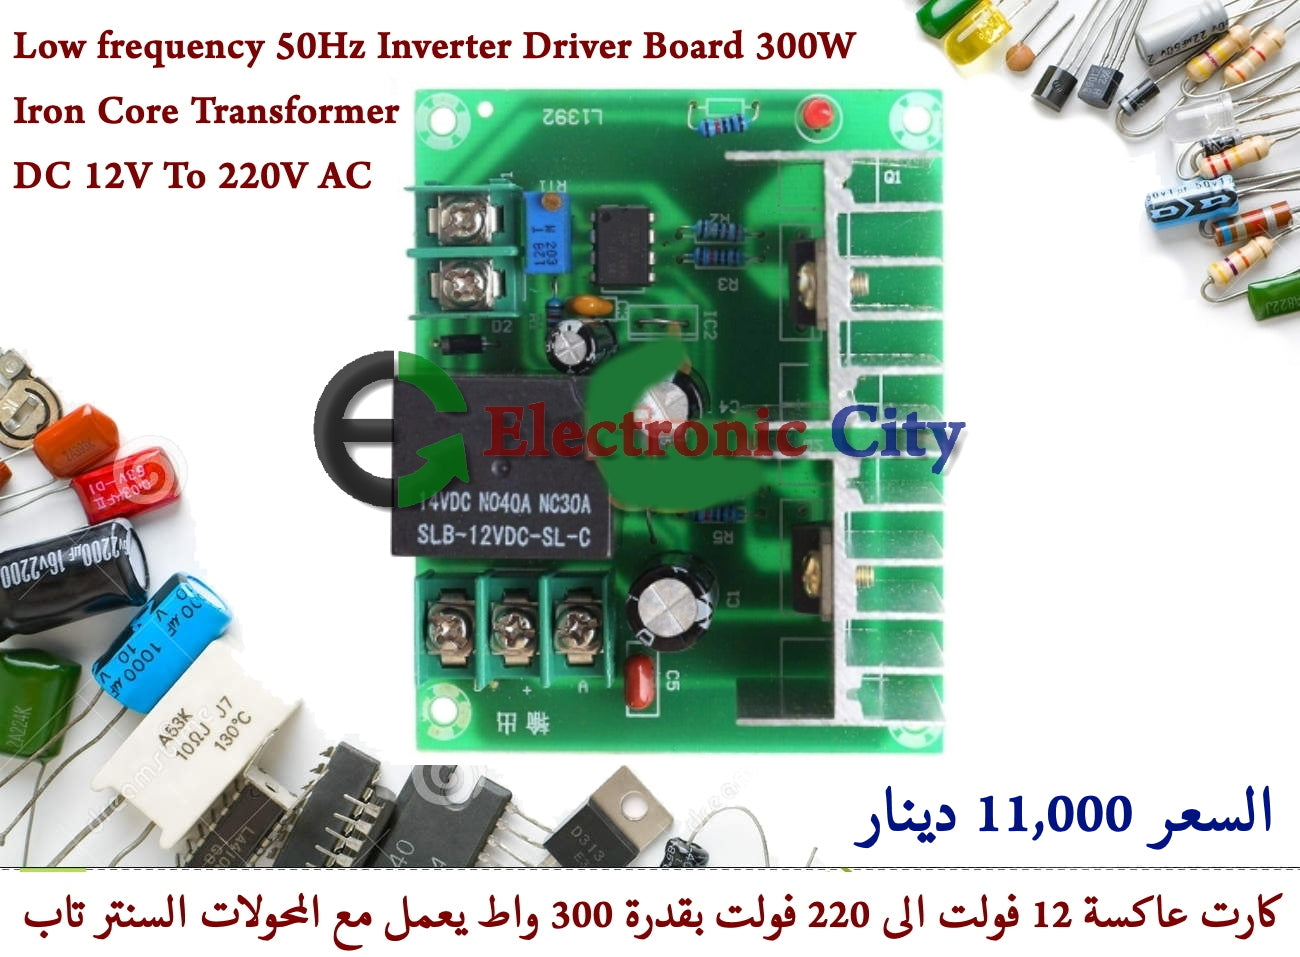 Low frequency 50Hz Inverter Driver Board 300W Iron Core Transformer DC 12V To 220V AC #G5 X13076